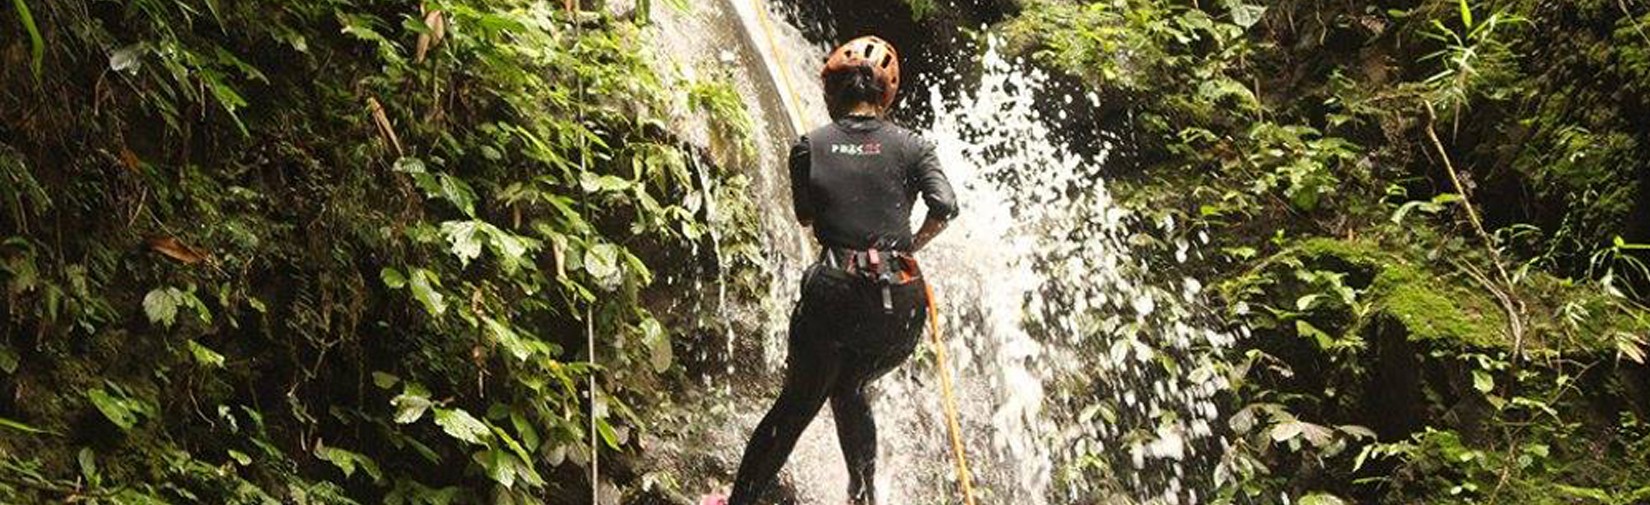 Canyoning in Nepal